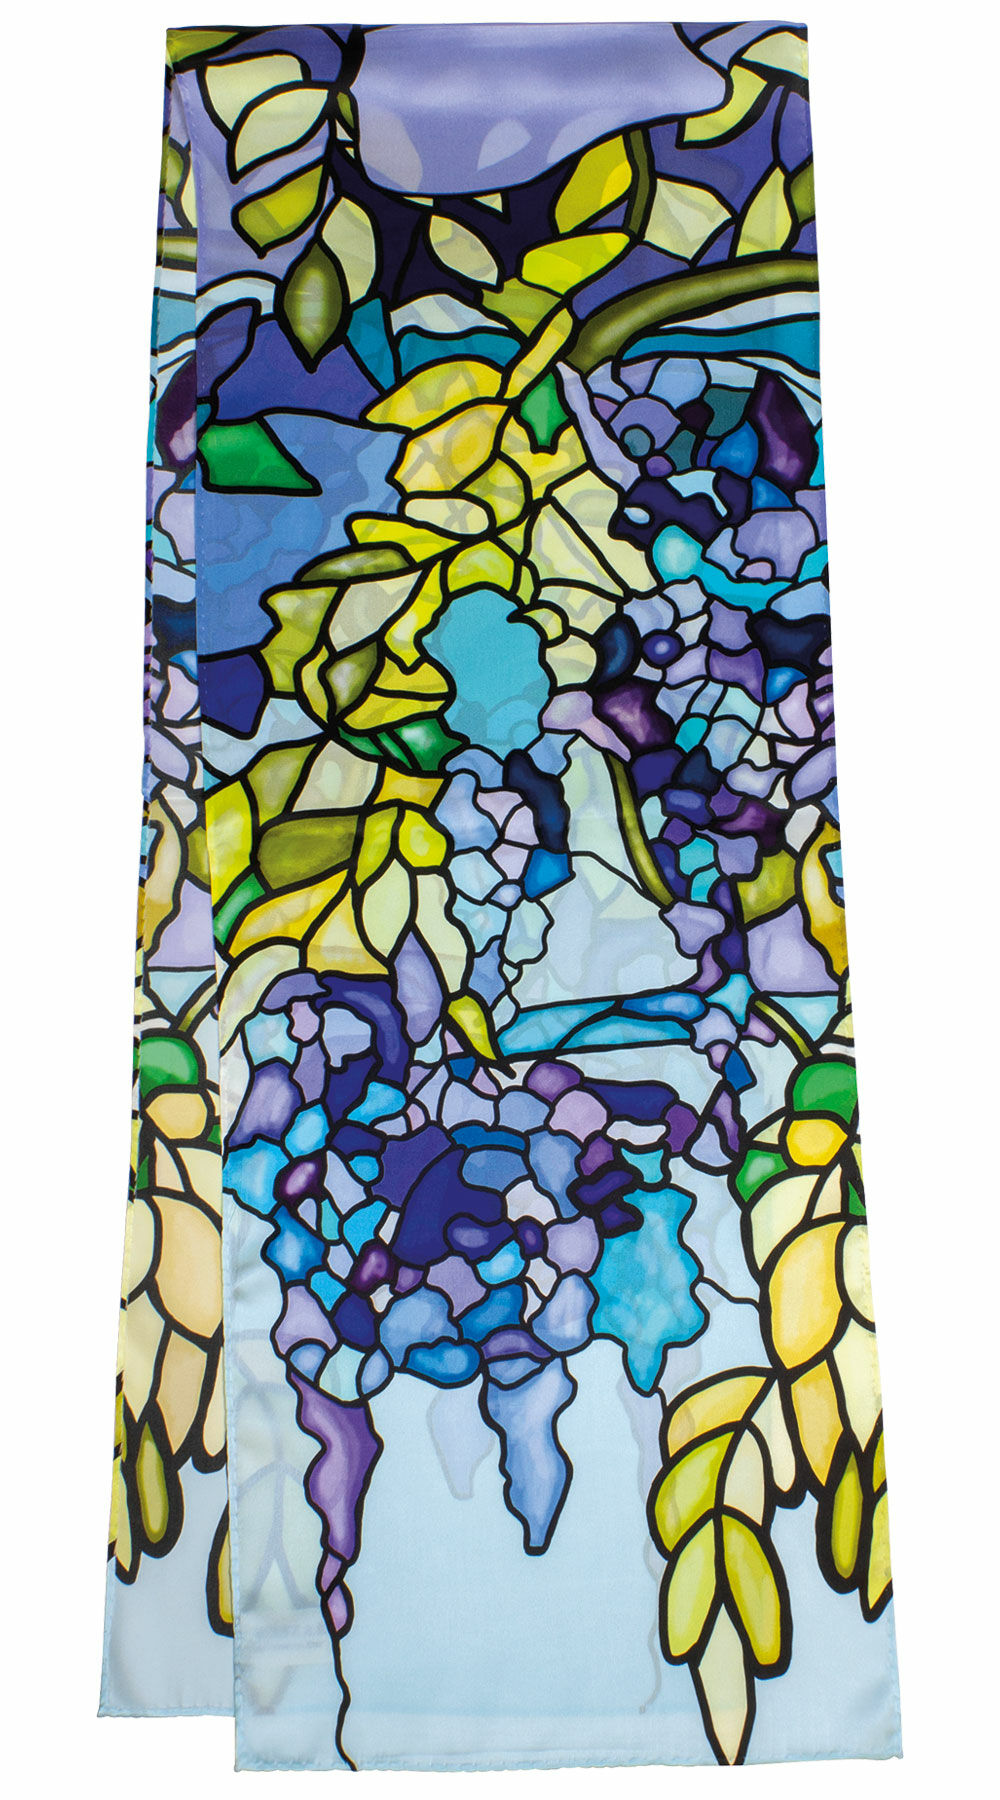 Silk scarf "Clematis blue" - after Louis C. Tiffany